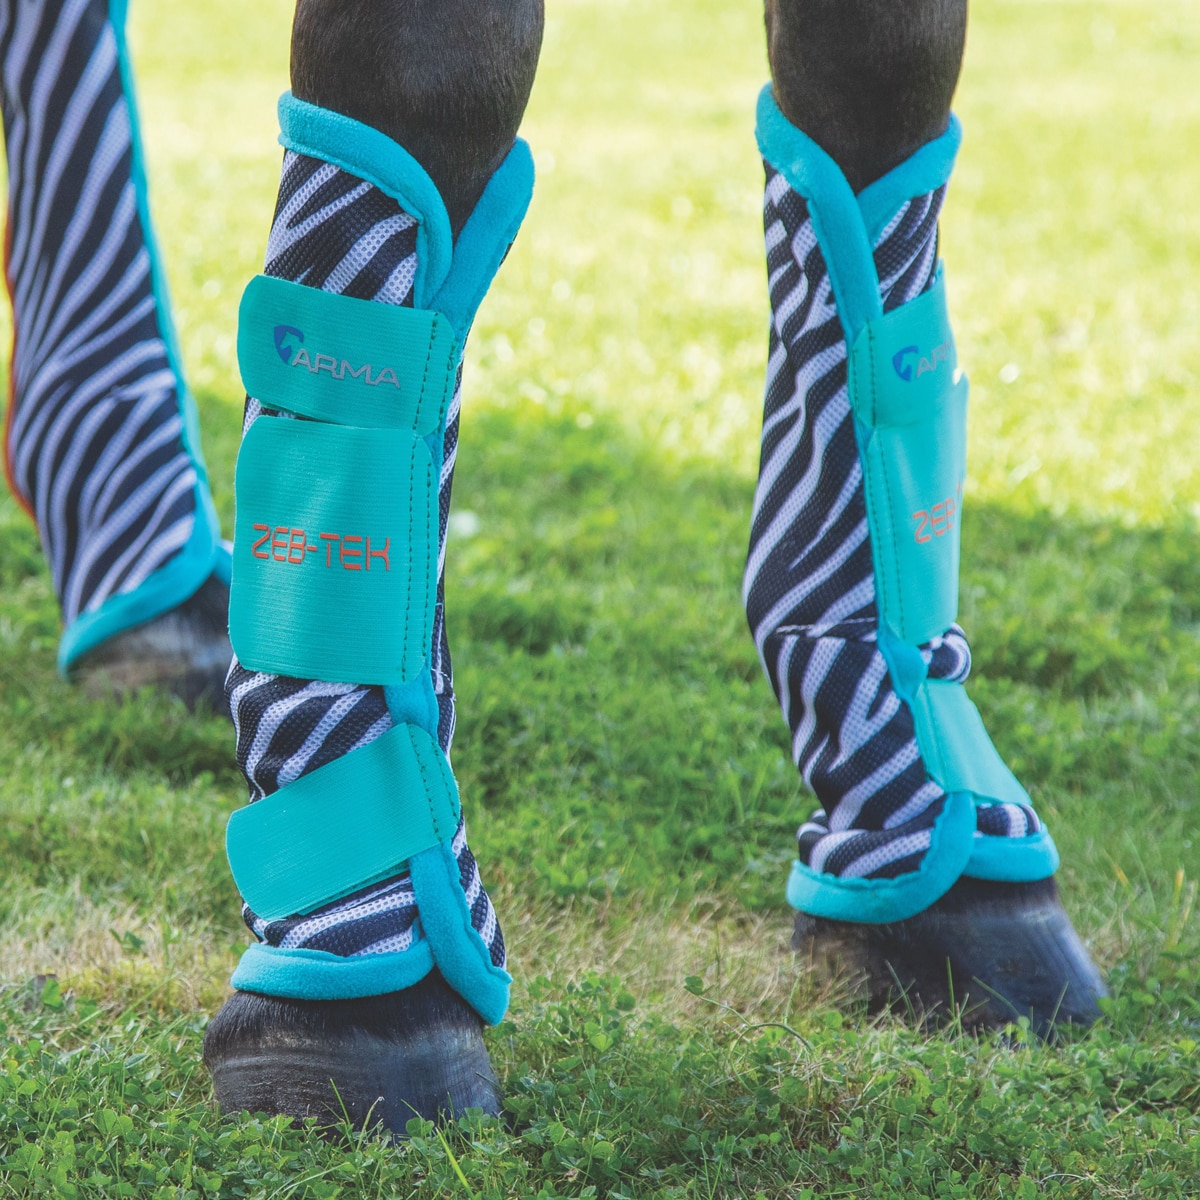 Shires Arma Pony Cob Full Fly Turnout Socks Boots Mesh Breathable Set ...